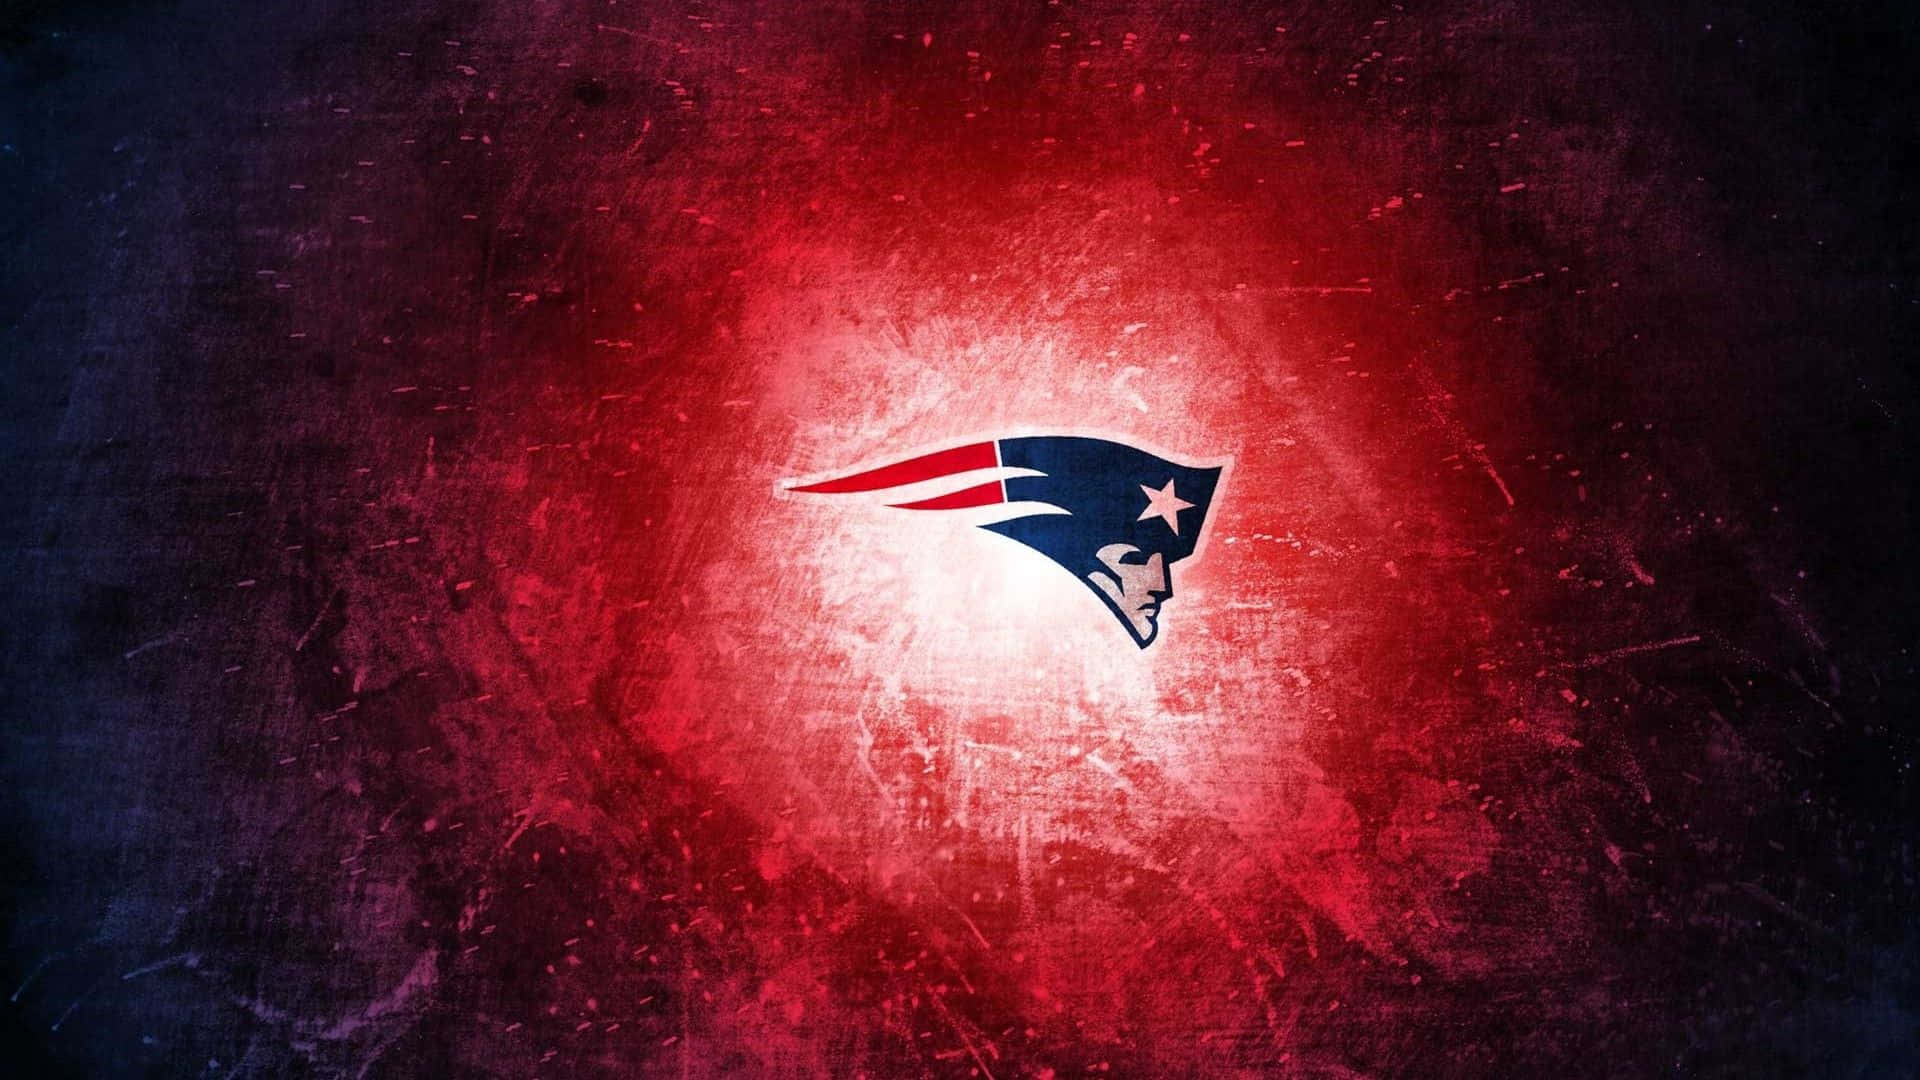 Support Your Favorite NFL Team with a Patriots Desktop Wallpaper